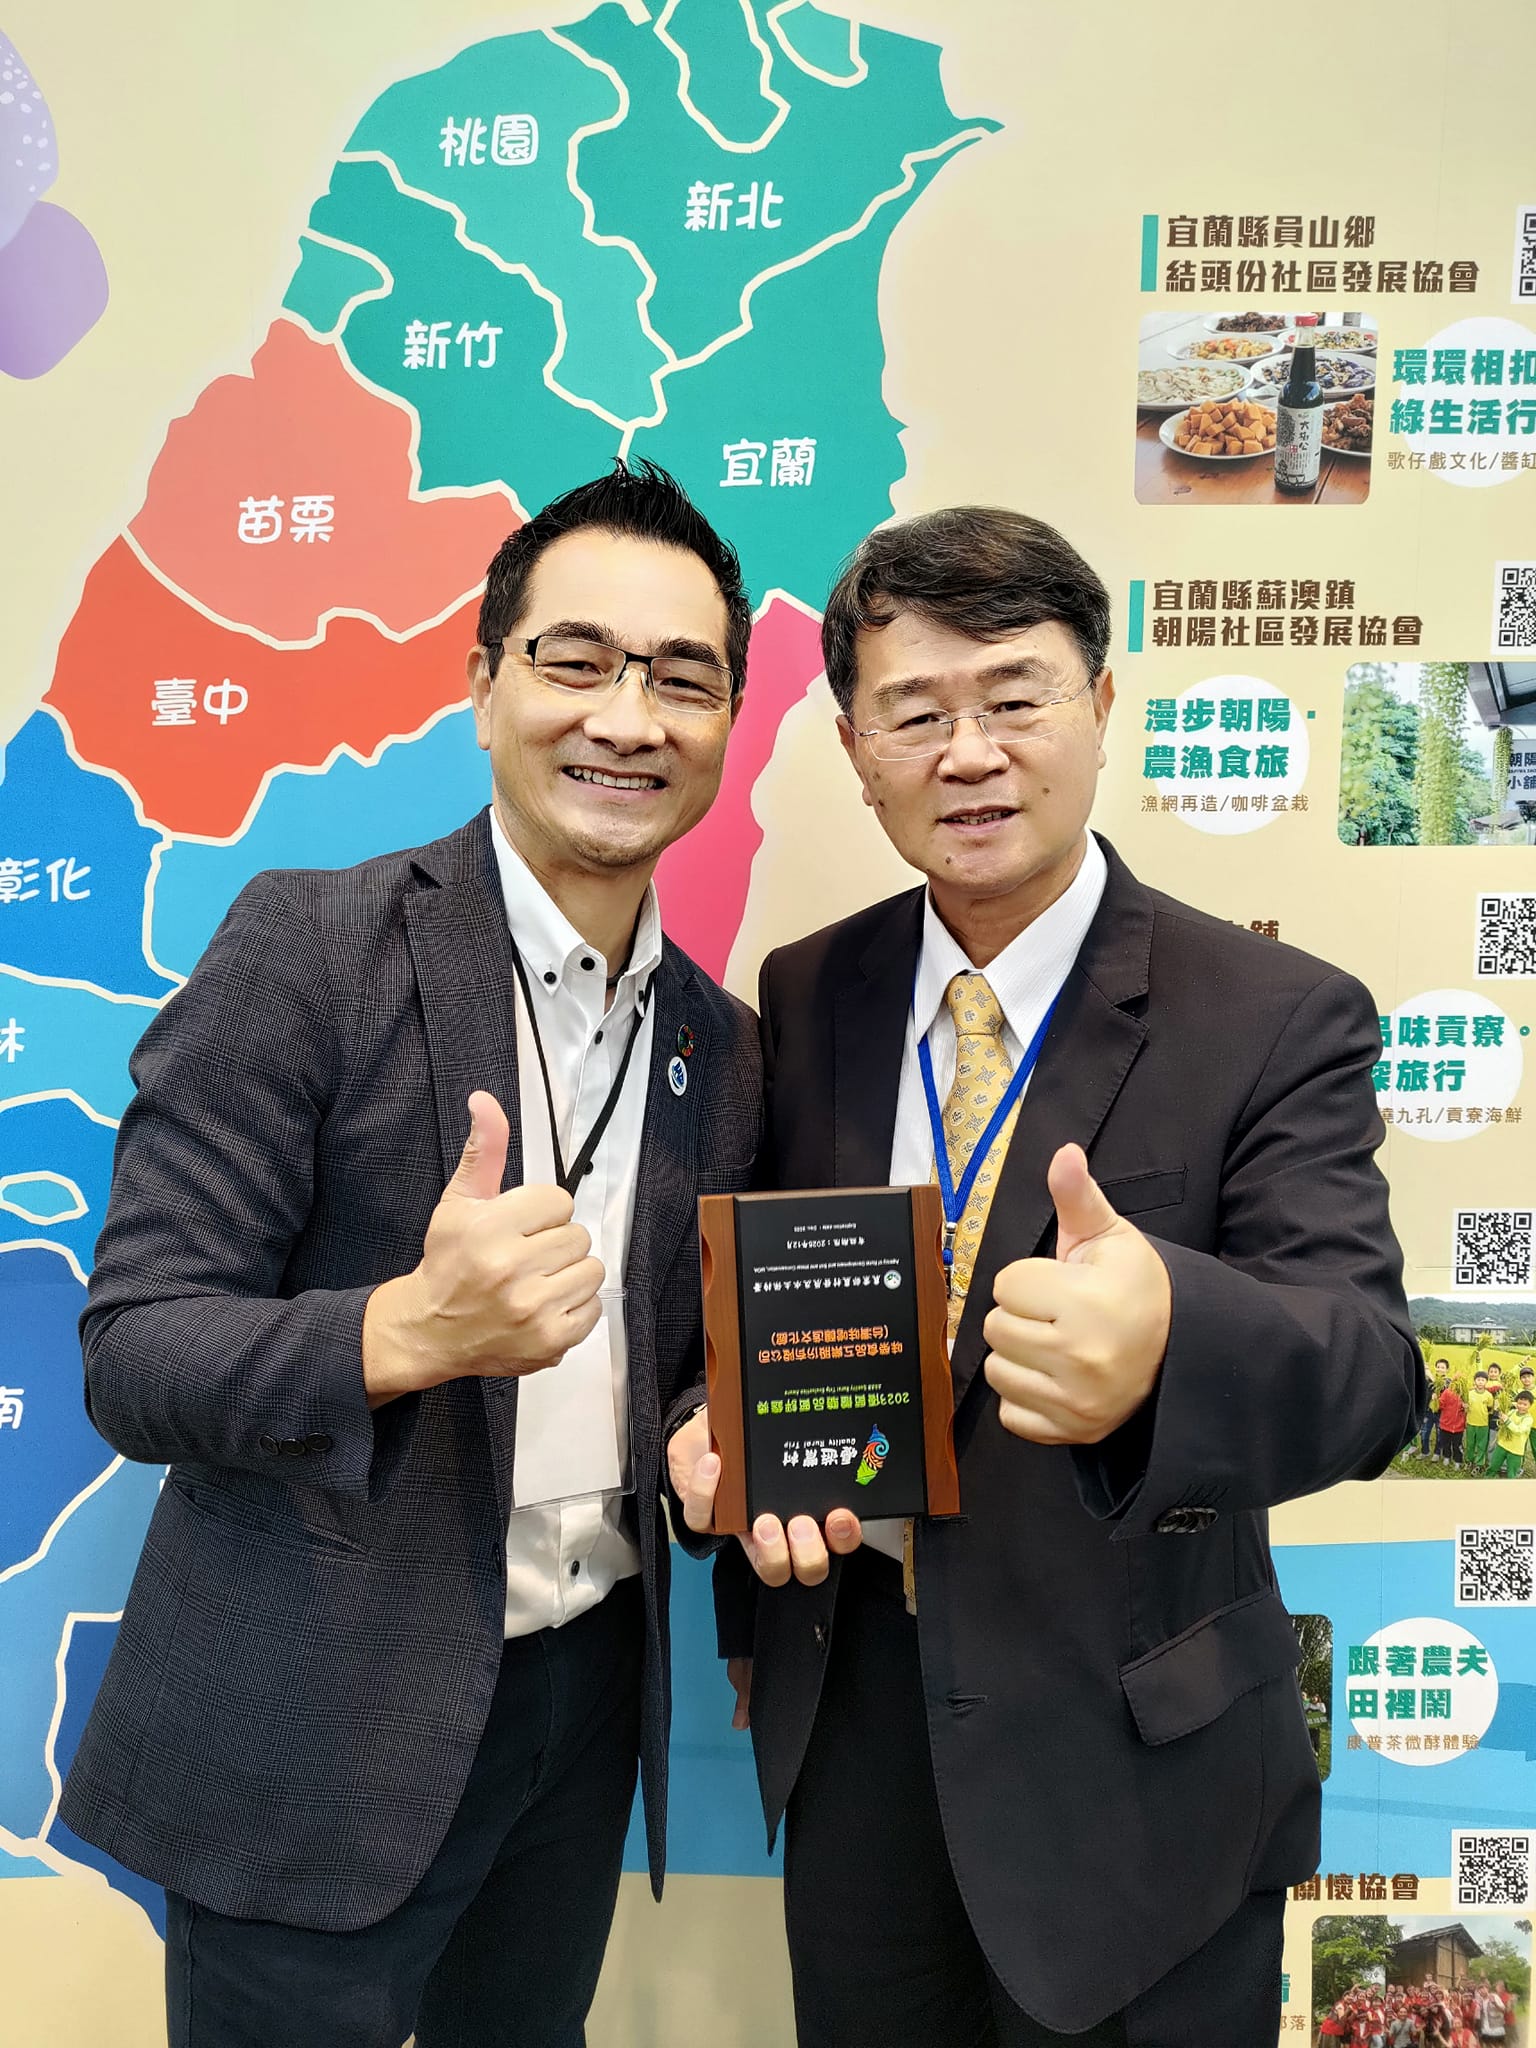 Taiwan Miso Brewing Cultural Center won the "2023 Youyou Rural Selection" evaluation from the "Ministry of Agriculture and Soil Conservation Service"